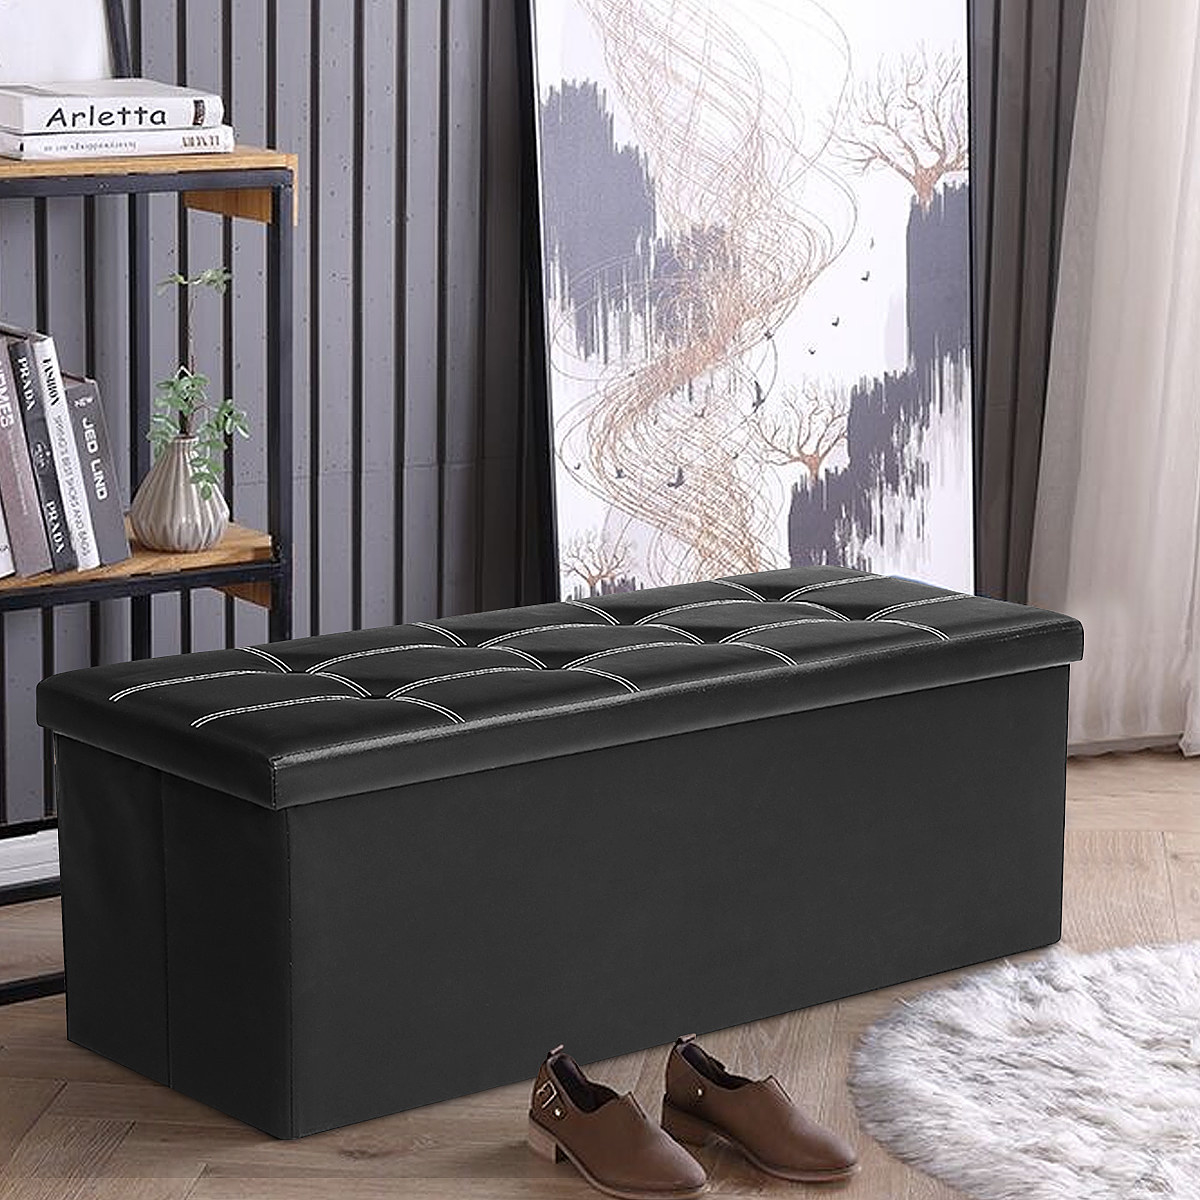 An image of a black foldable storage ottoman that is available in five color choices